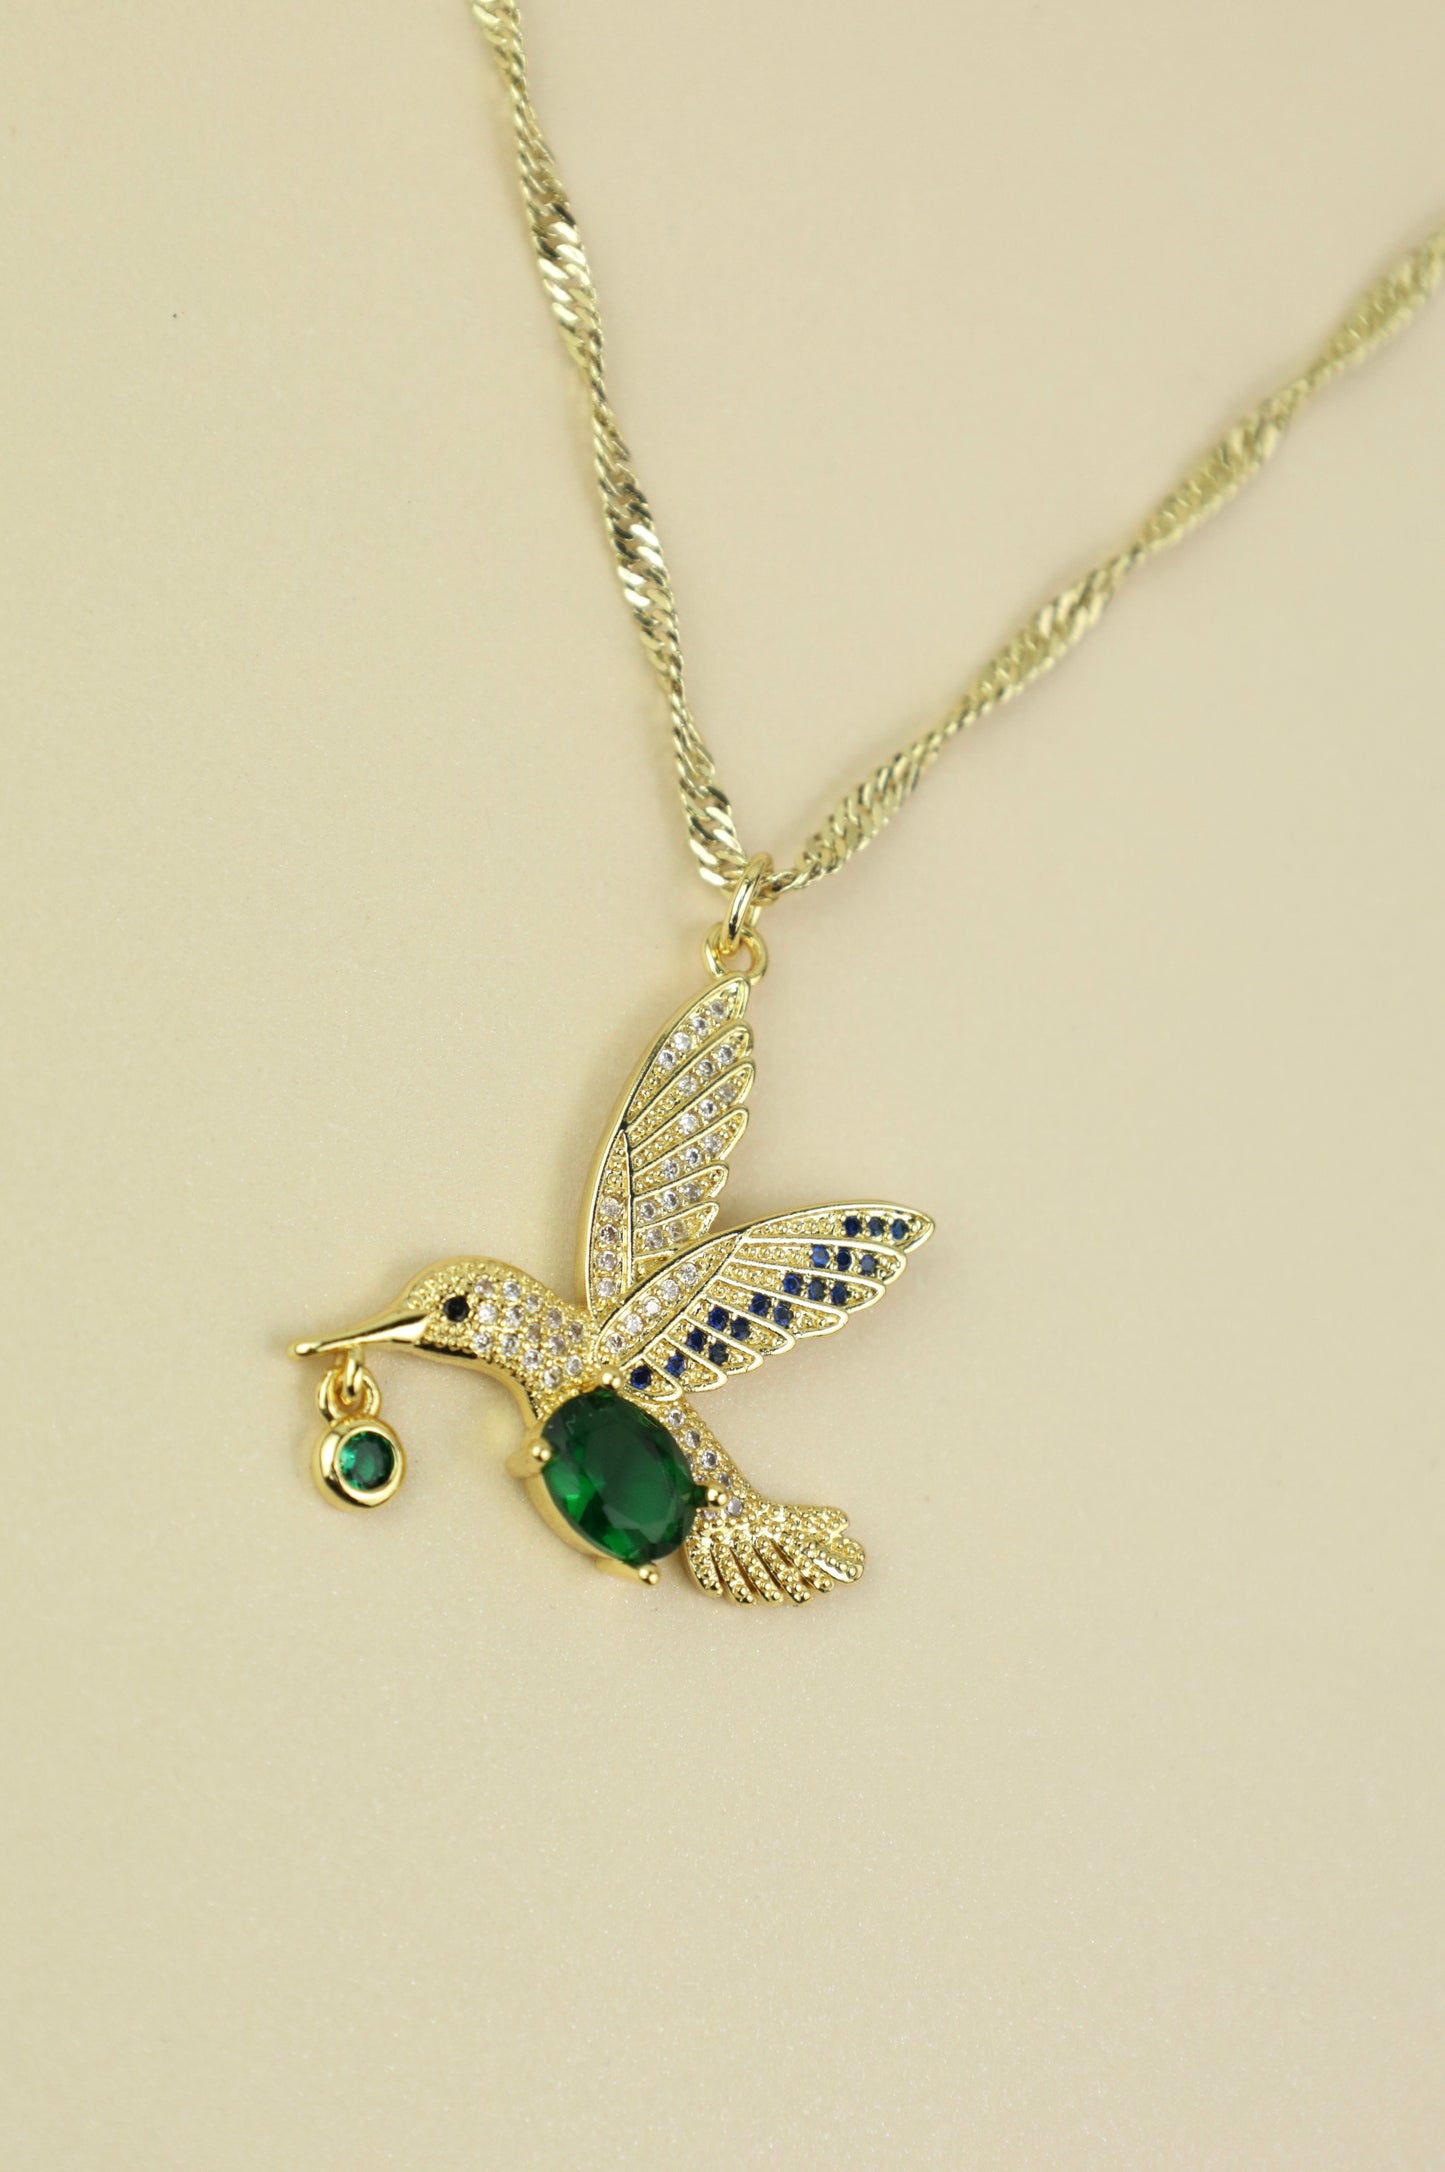 Hummingbird necklace in gold